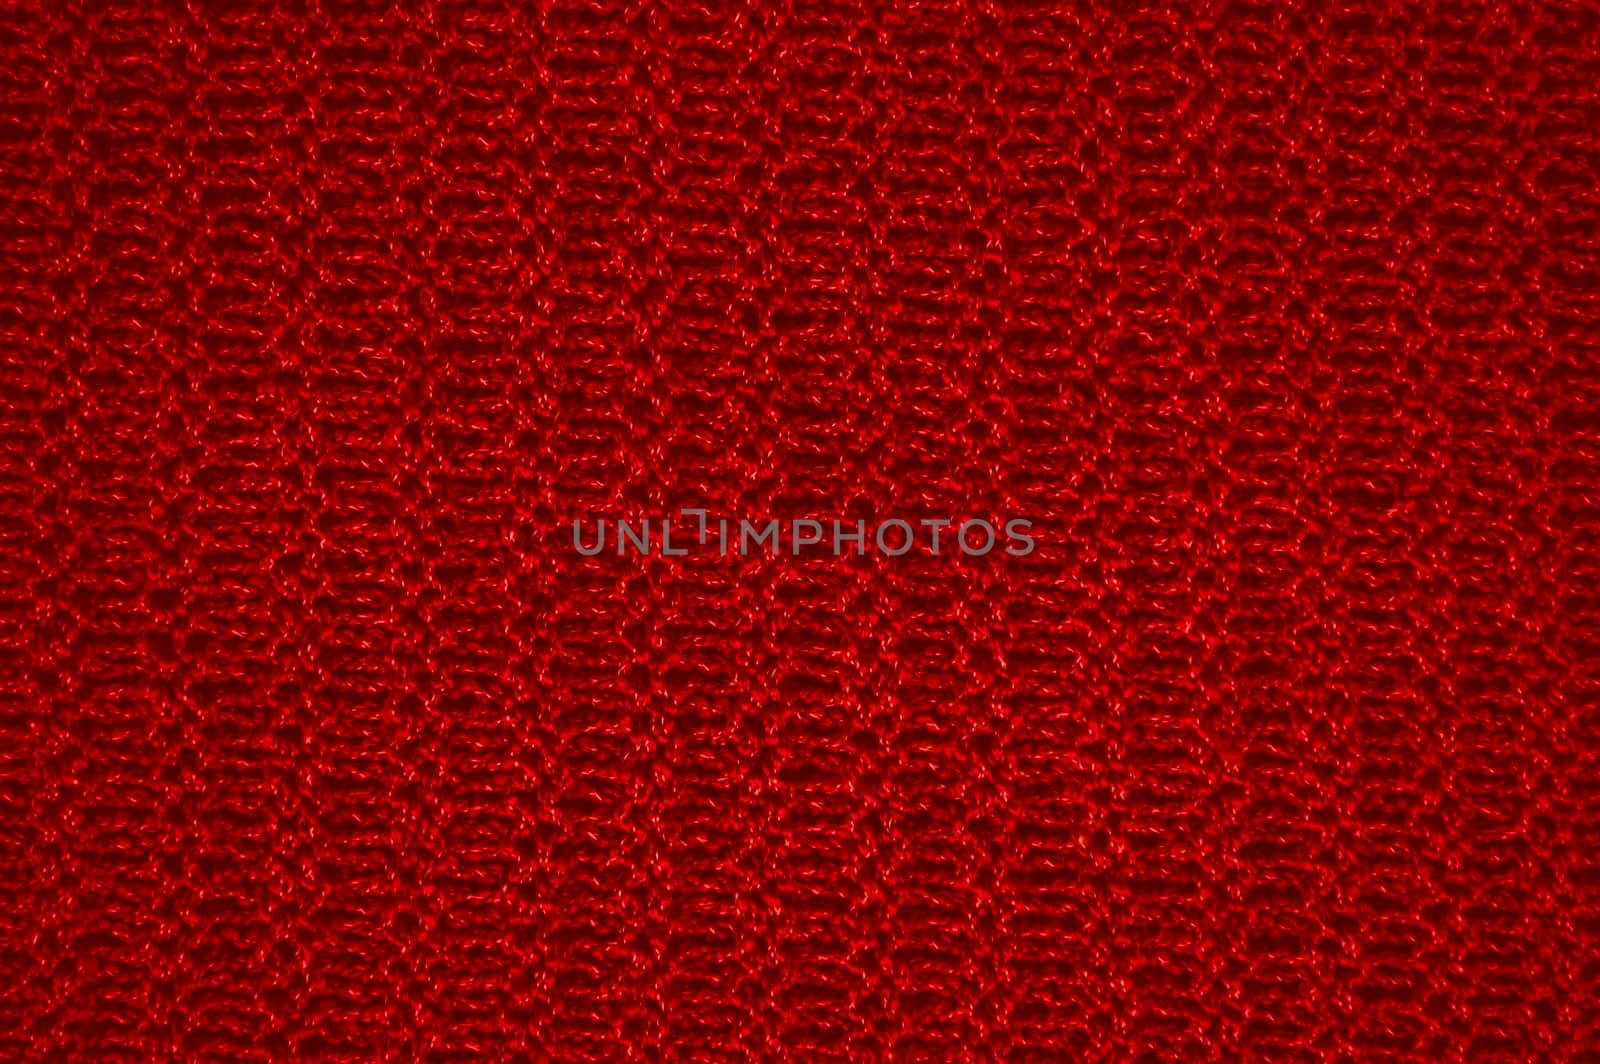 Linen Abstract Wool. Vintage Woven Pattern. Closeup Handmade Holiday Background. Knitted Fabric. Red Structure Thread. Nordic Warm Yarn. Soft Jumper Embroidery. Macro Knitted Wool.